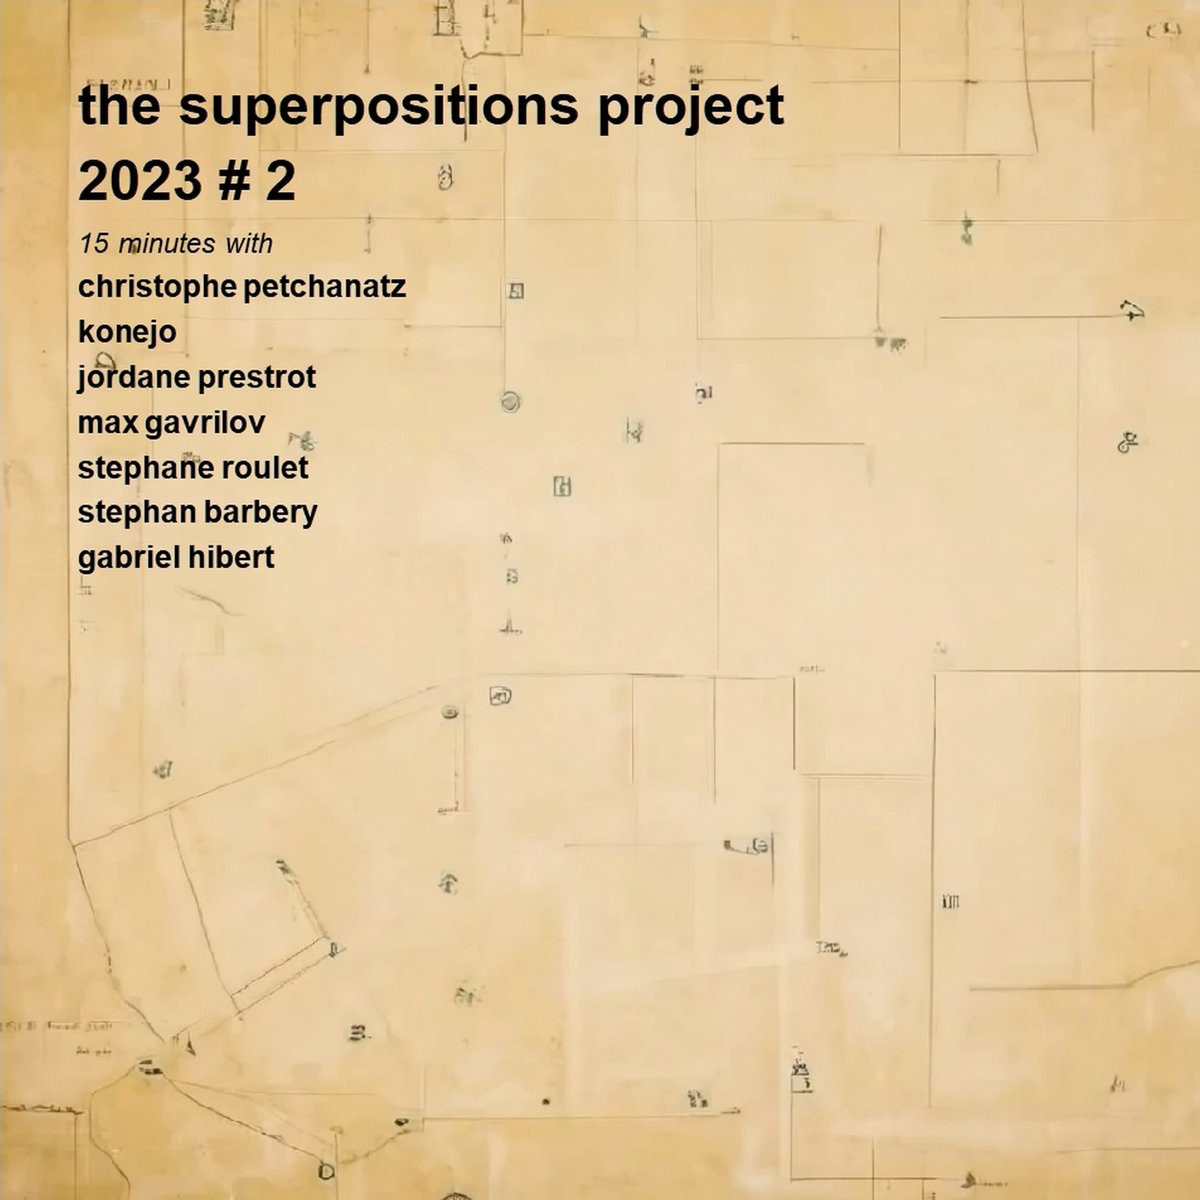 The Superpositions Project 2023 # 2